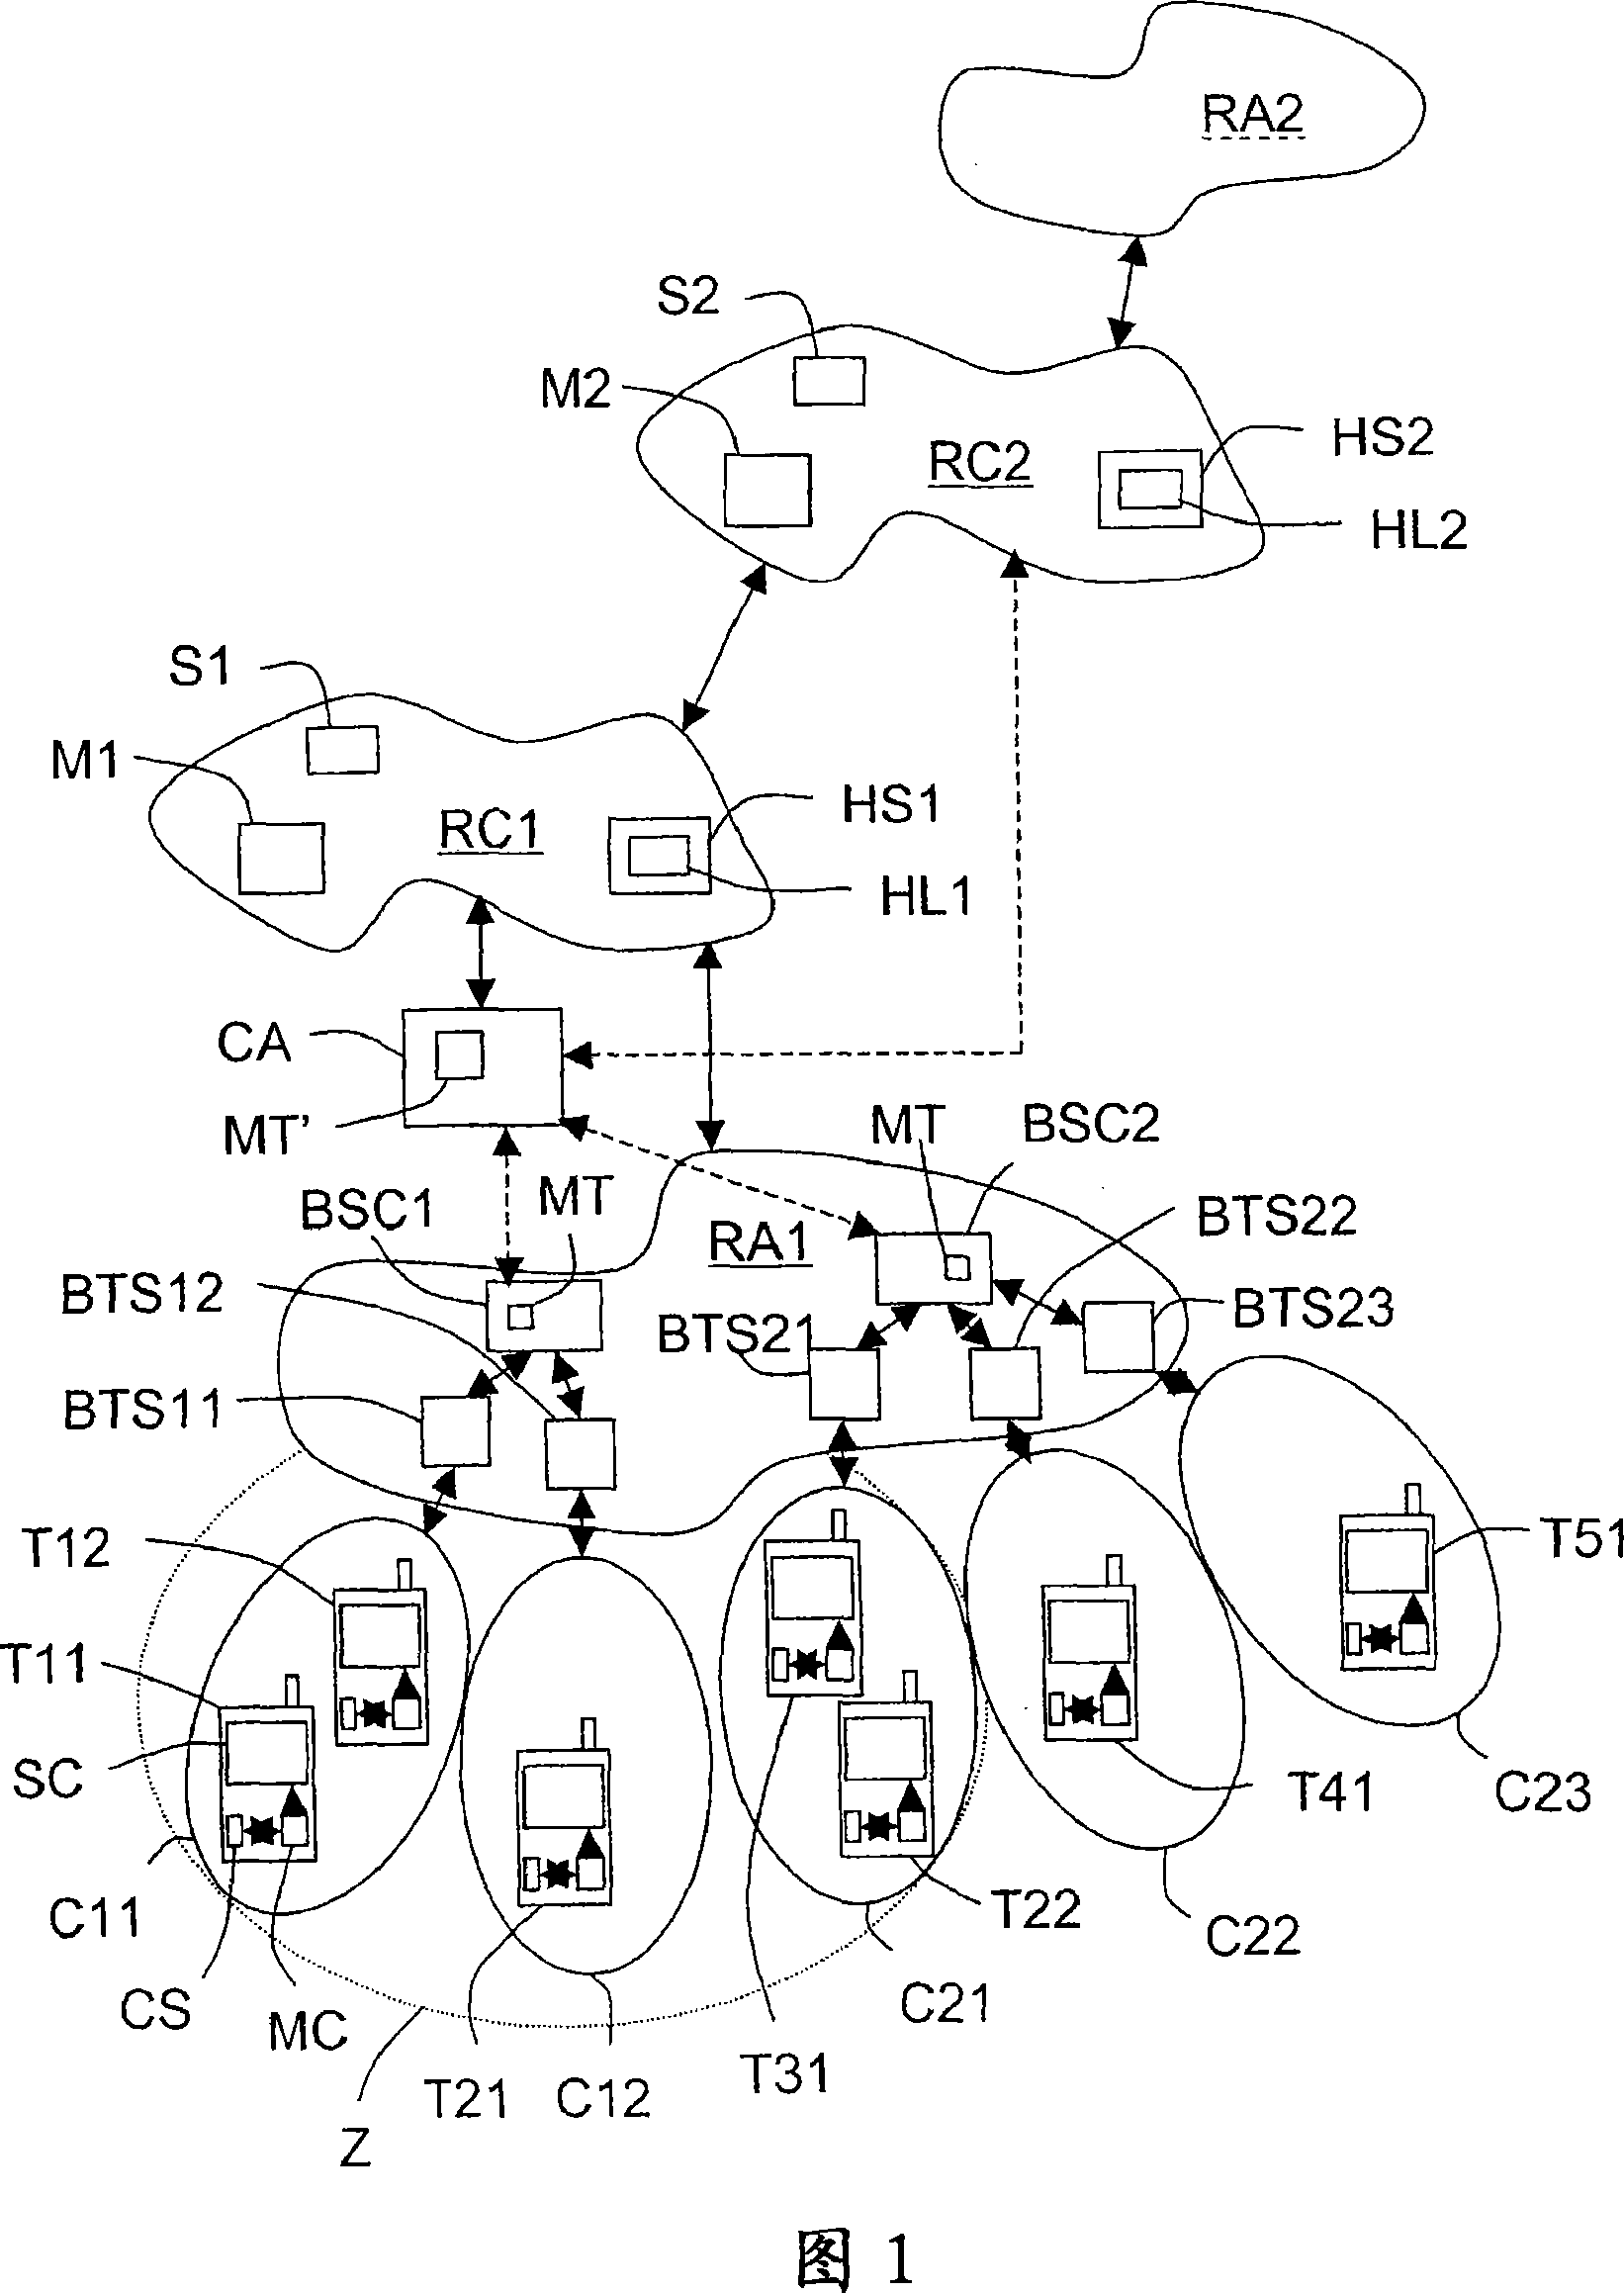 Method for transmitting urgent alert messages to sets of mobile terminals located in cells of a radio communication network, and related radio network controller